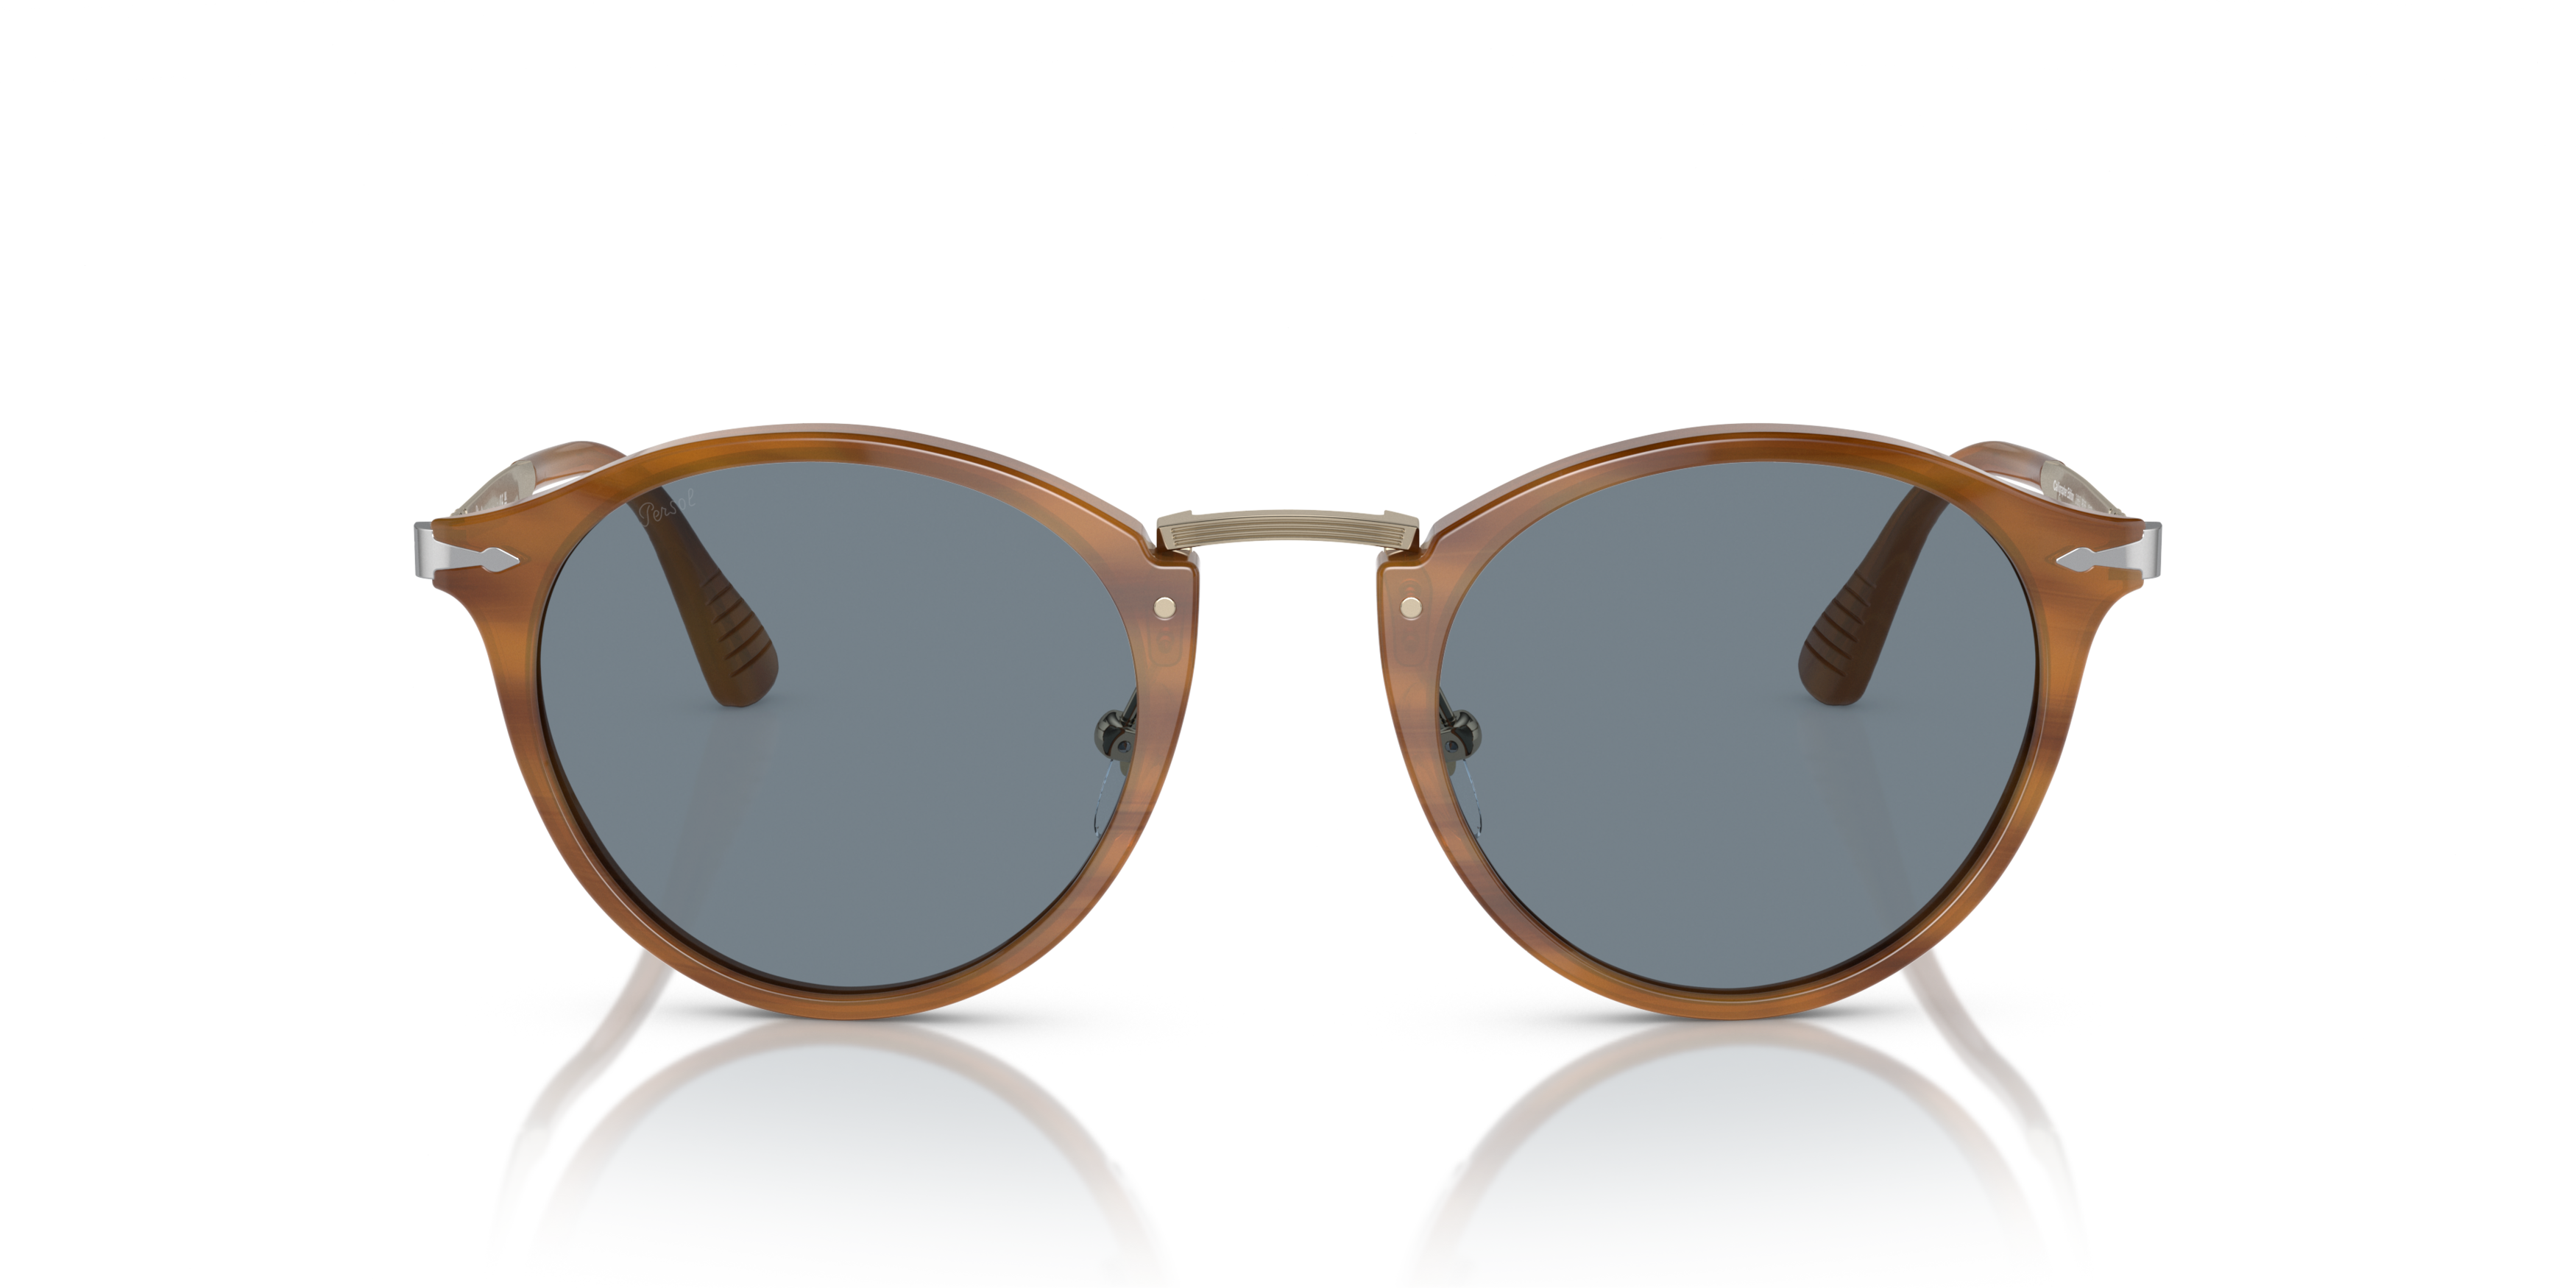 [products.image.front] Persol PO3166S 960